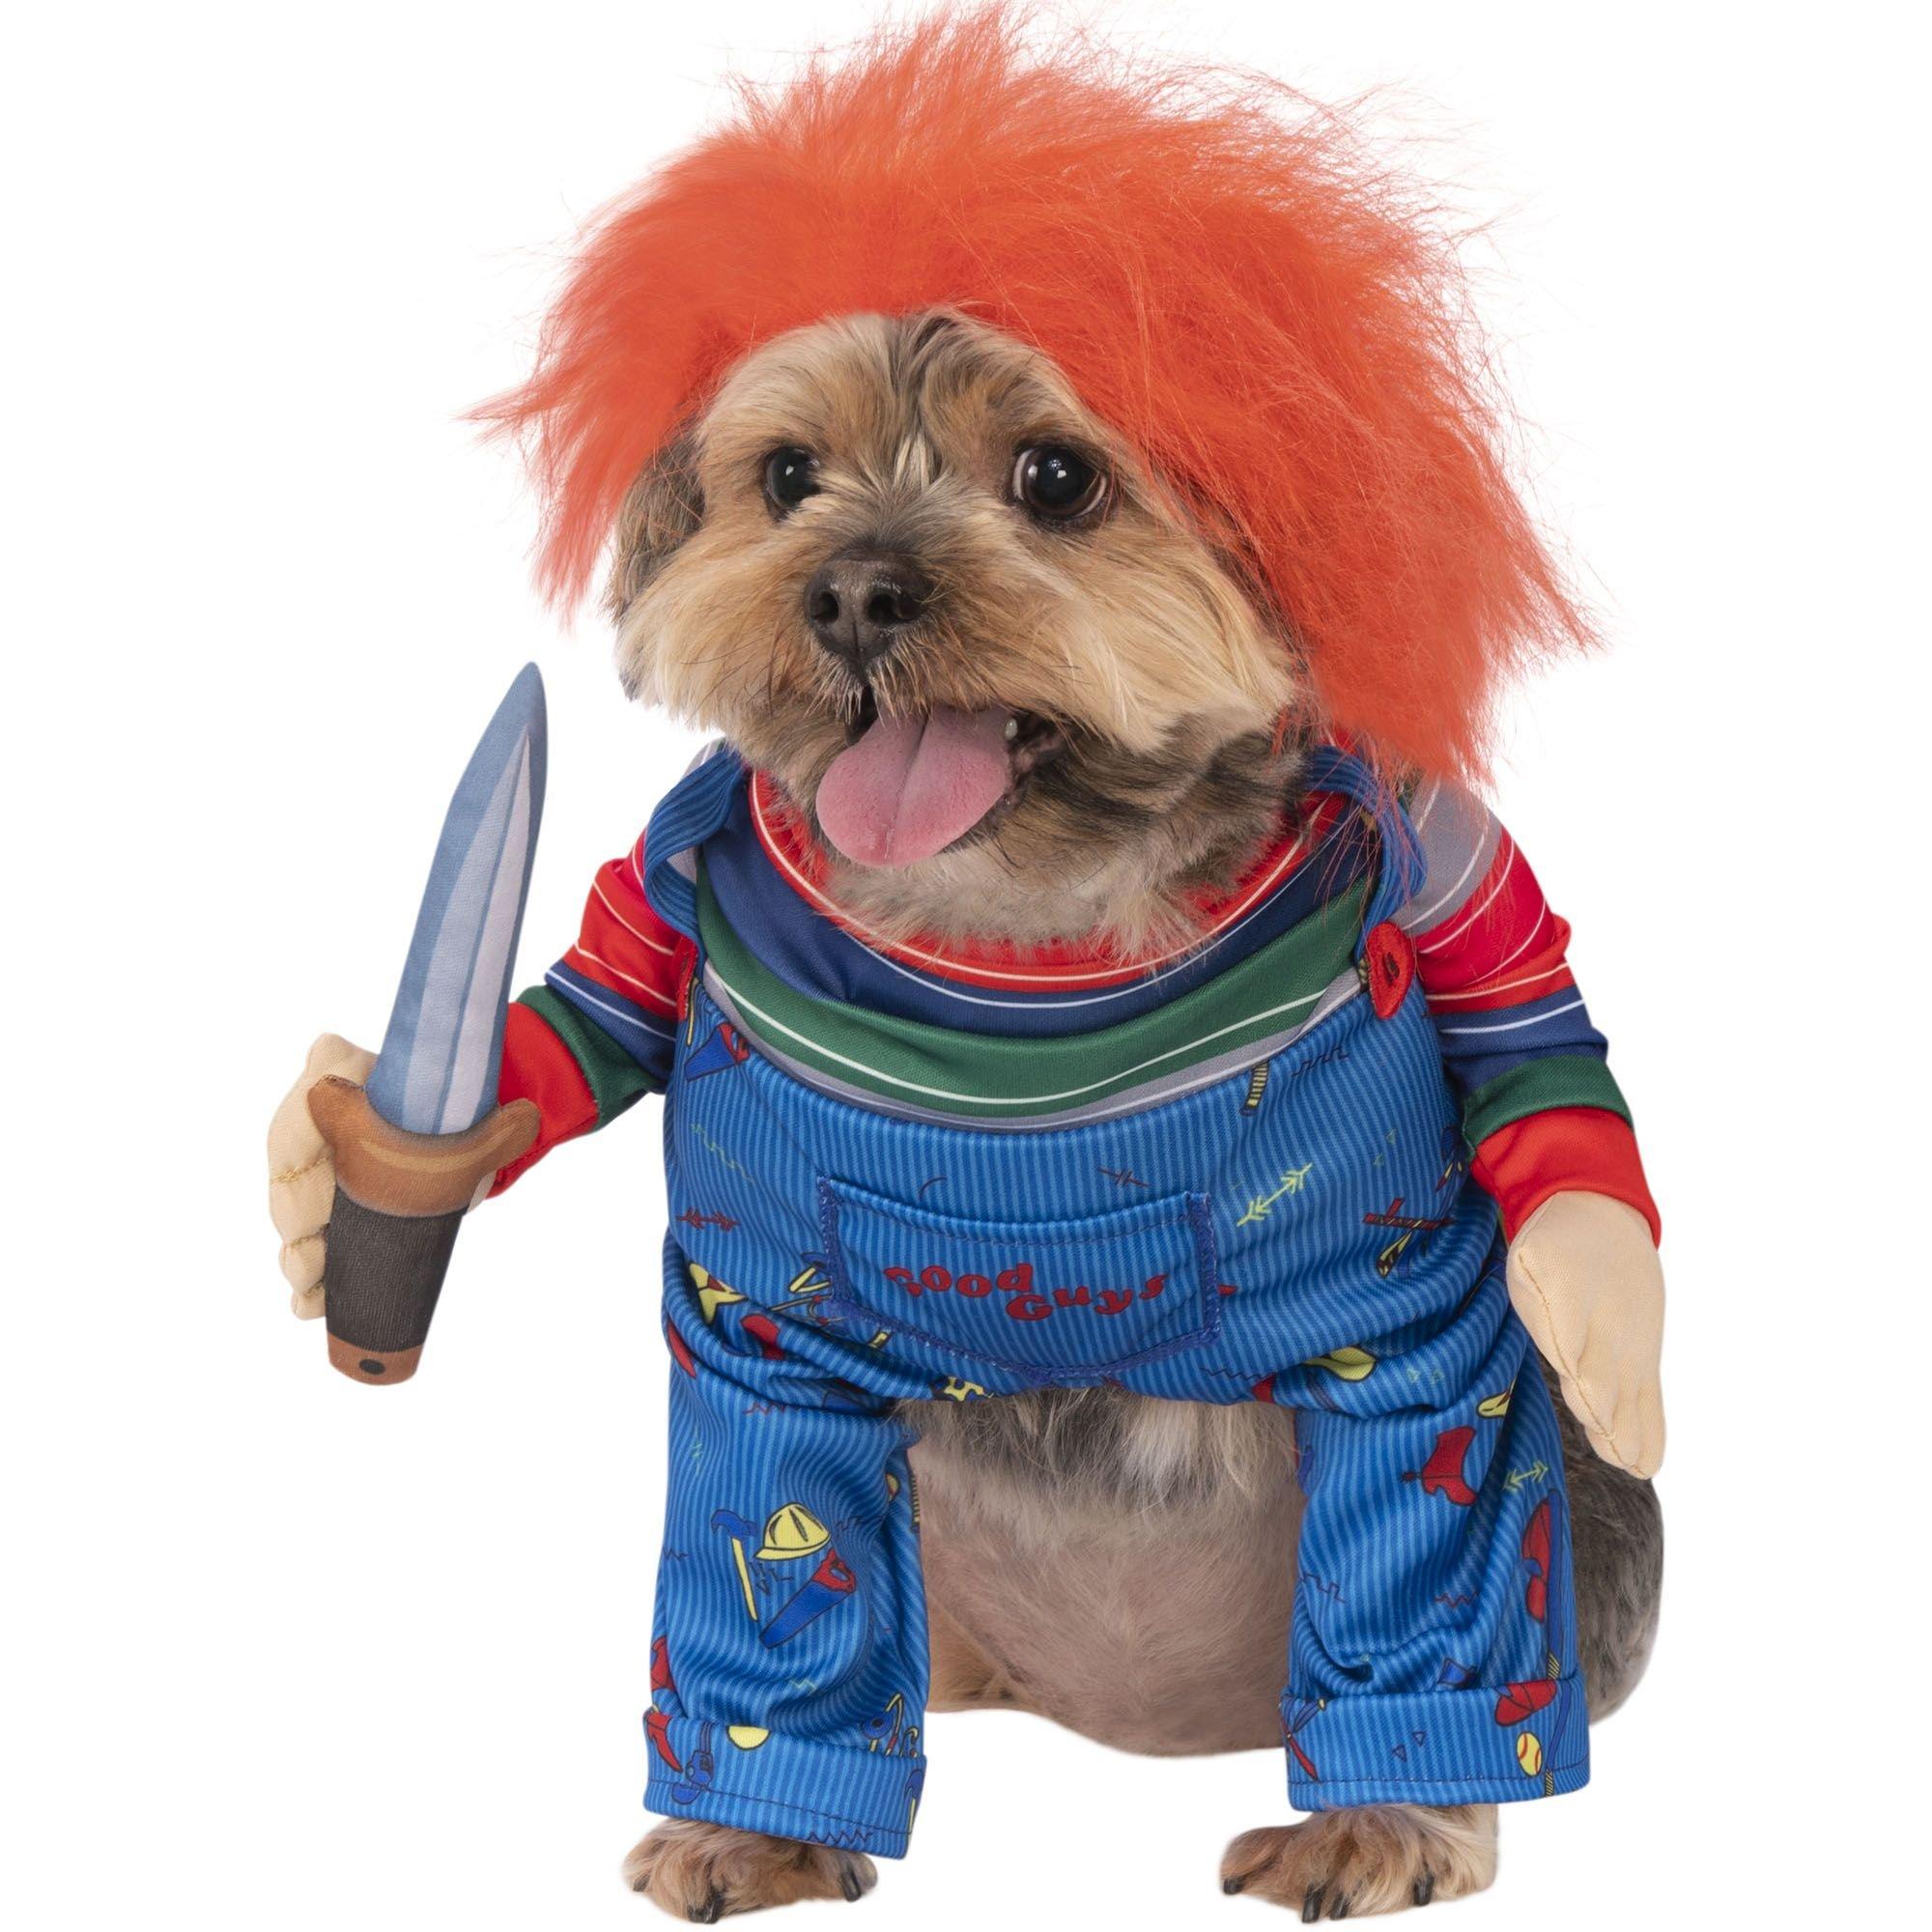 Chucky Family Halloween Costumes - Child's Play | Party City